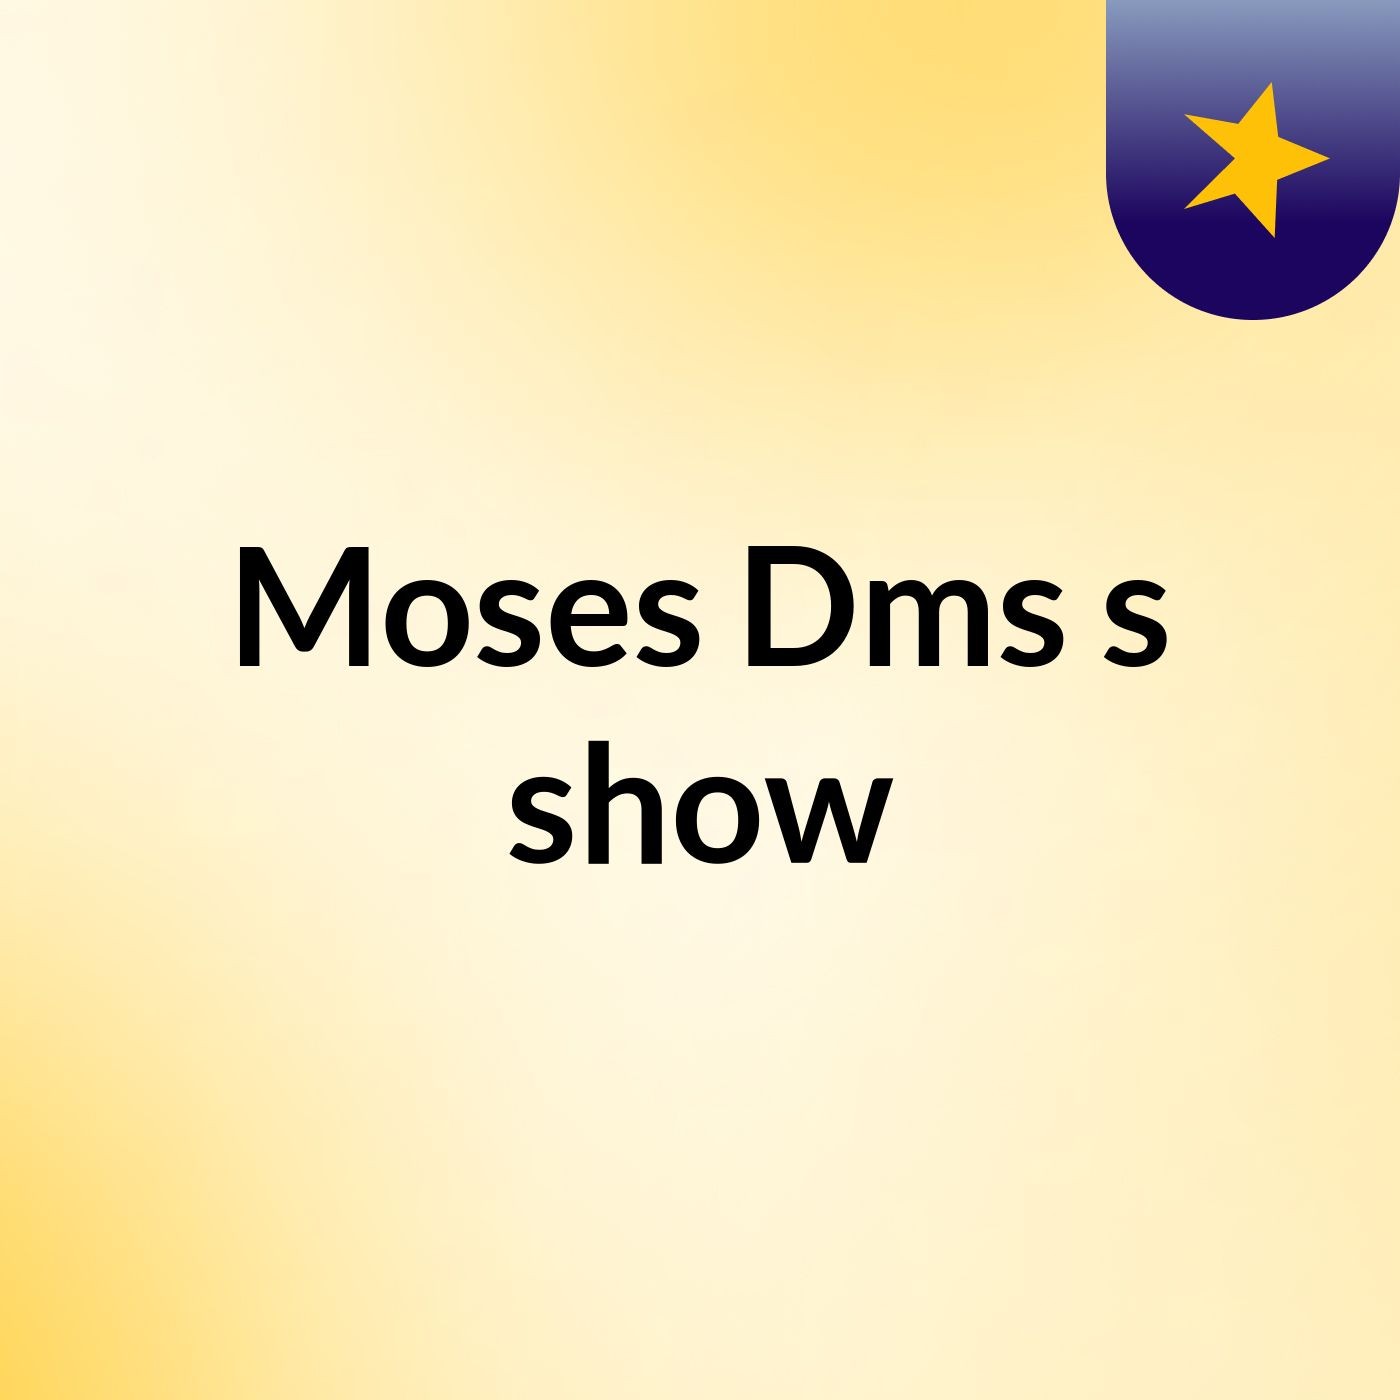 Moses Dms's show